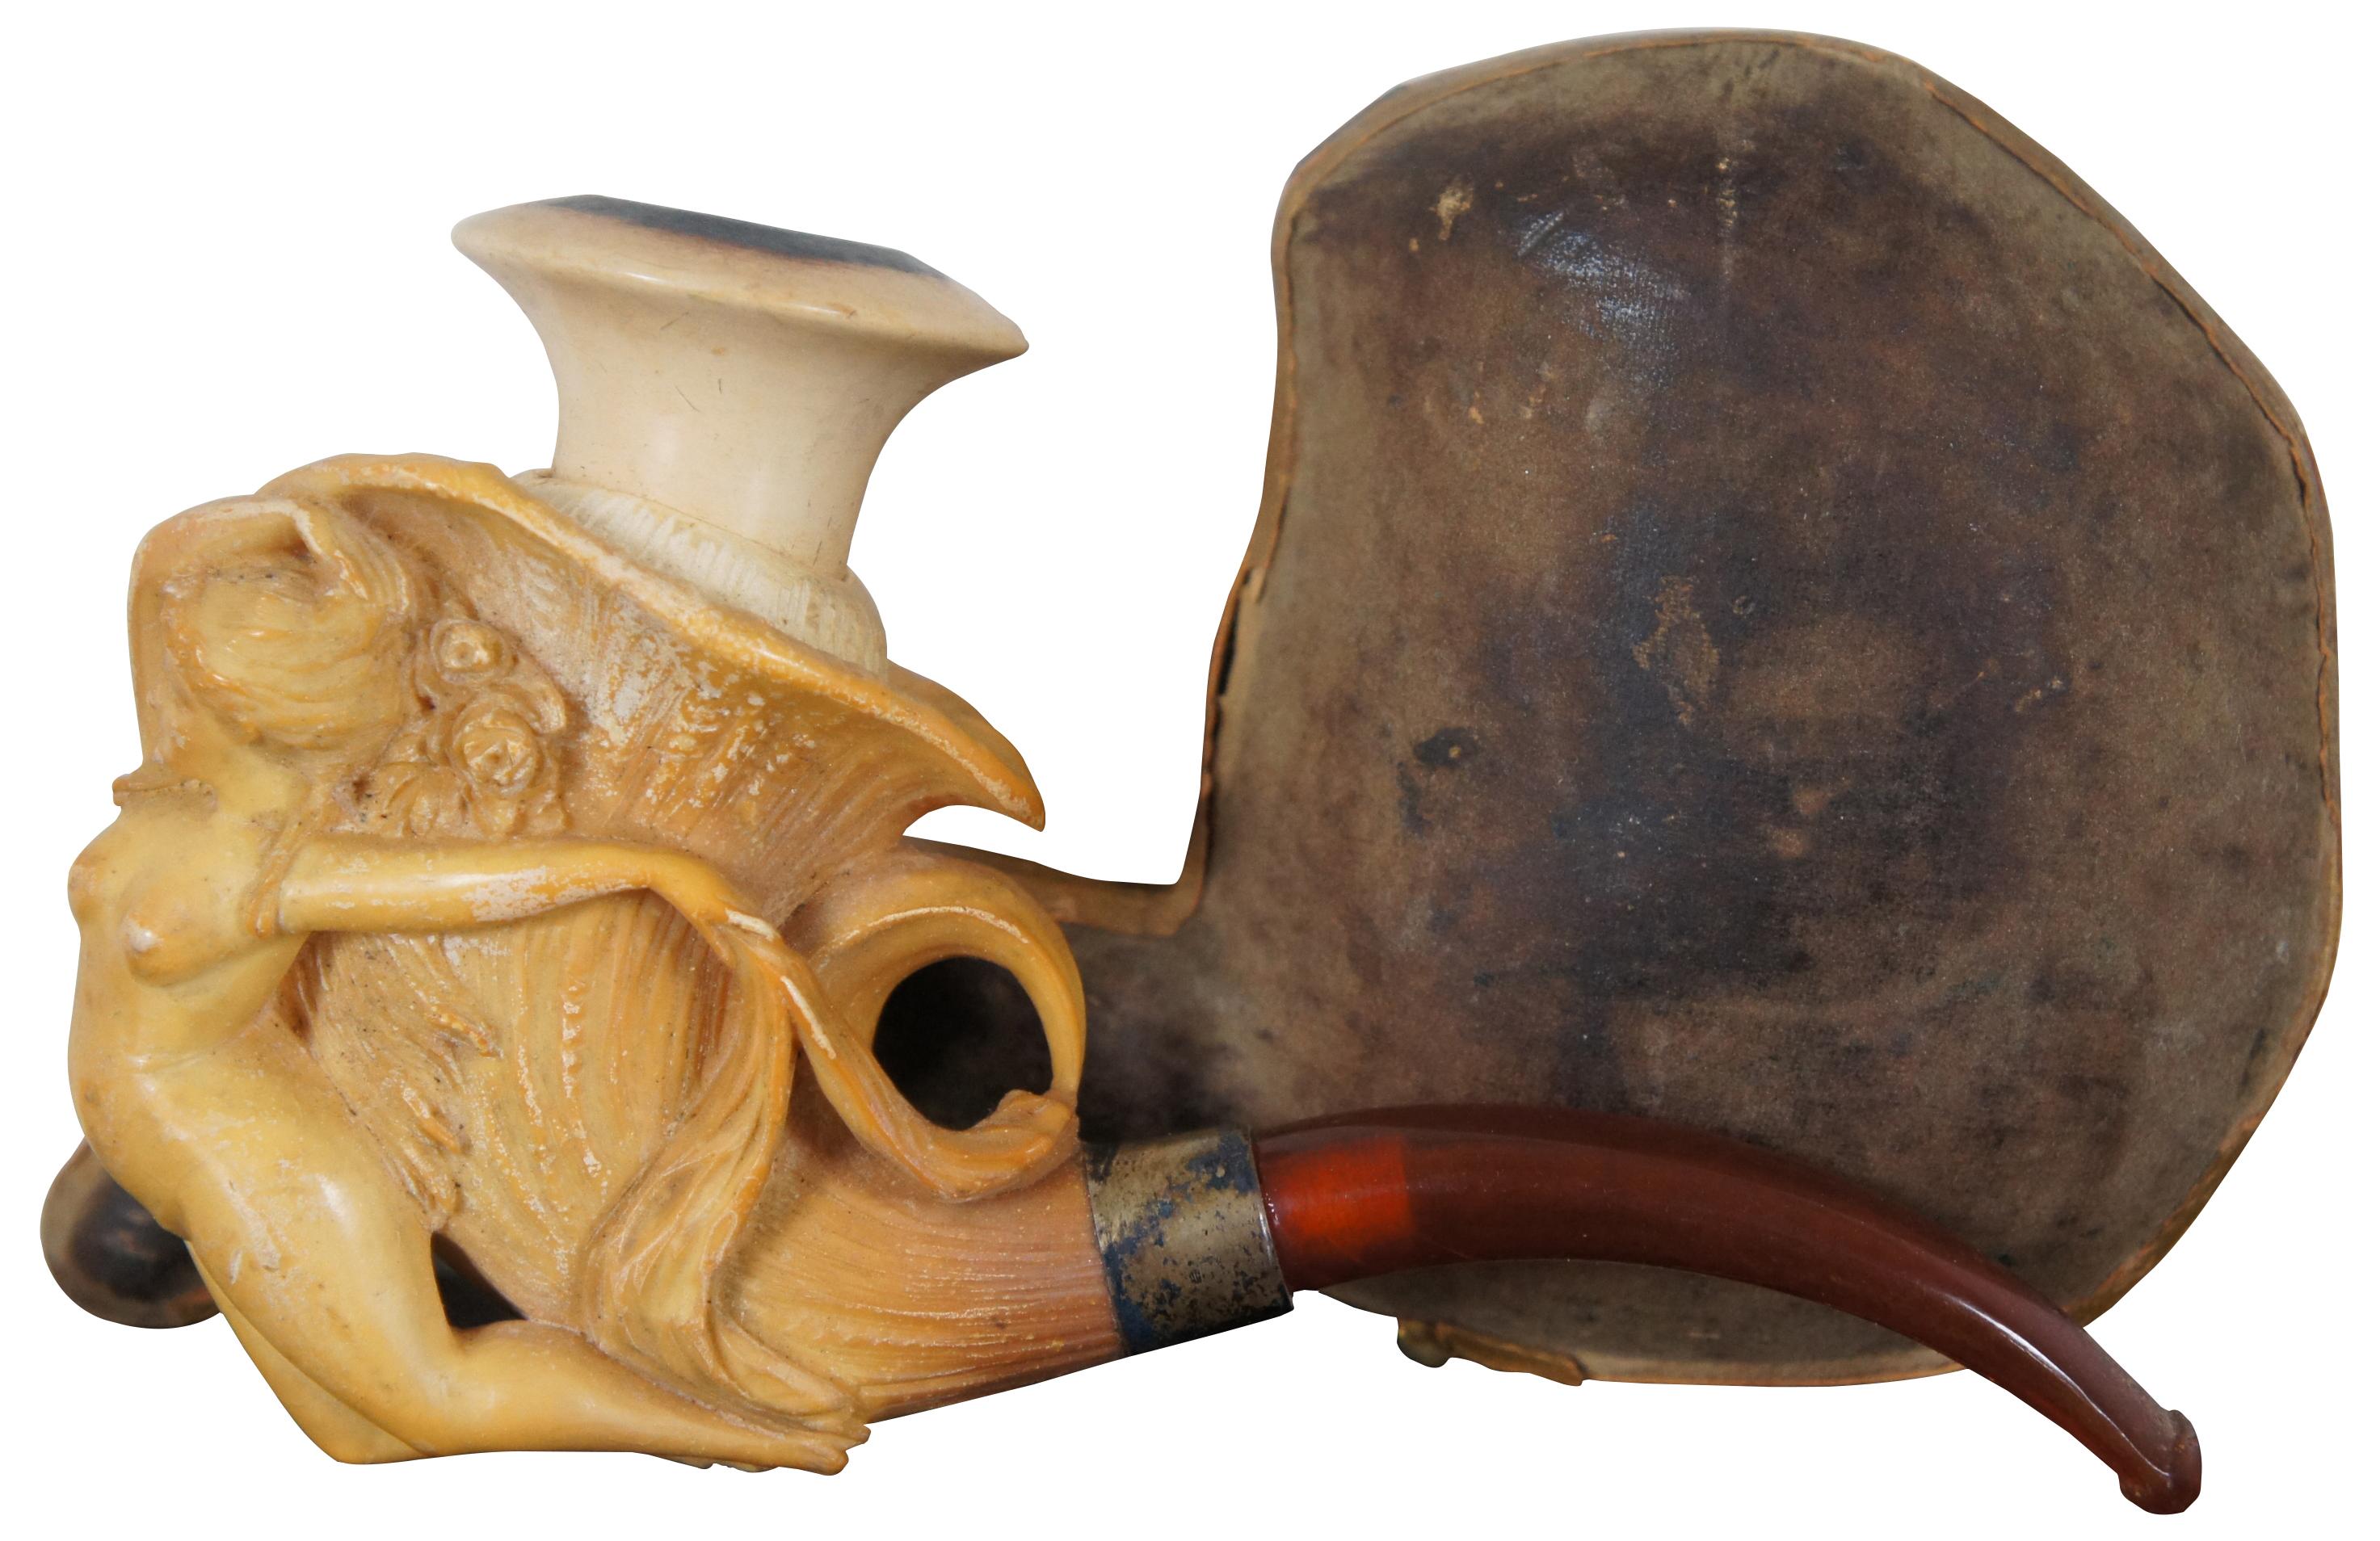 Antique art nouveau meerschaum tobacco smoking pipe with amber stem, carved in the shape of a morning glory or trumpet flower with a nude female figure reclined against the front.
   